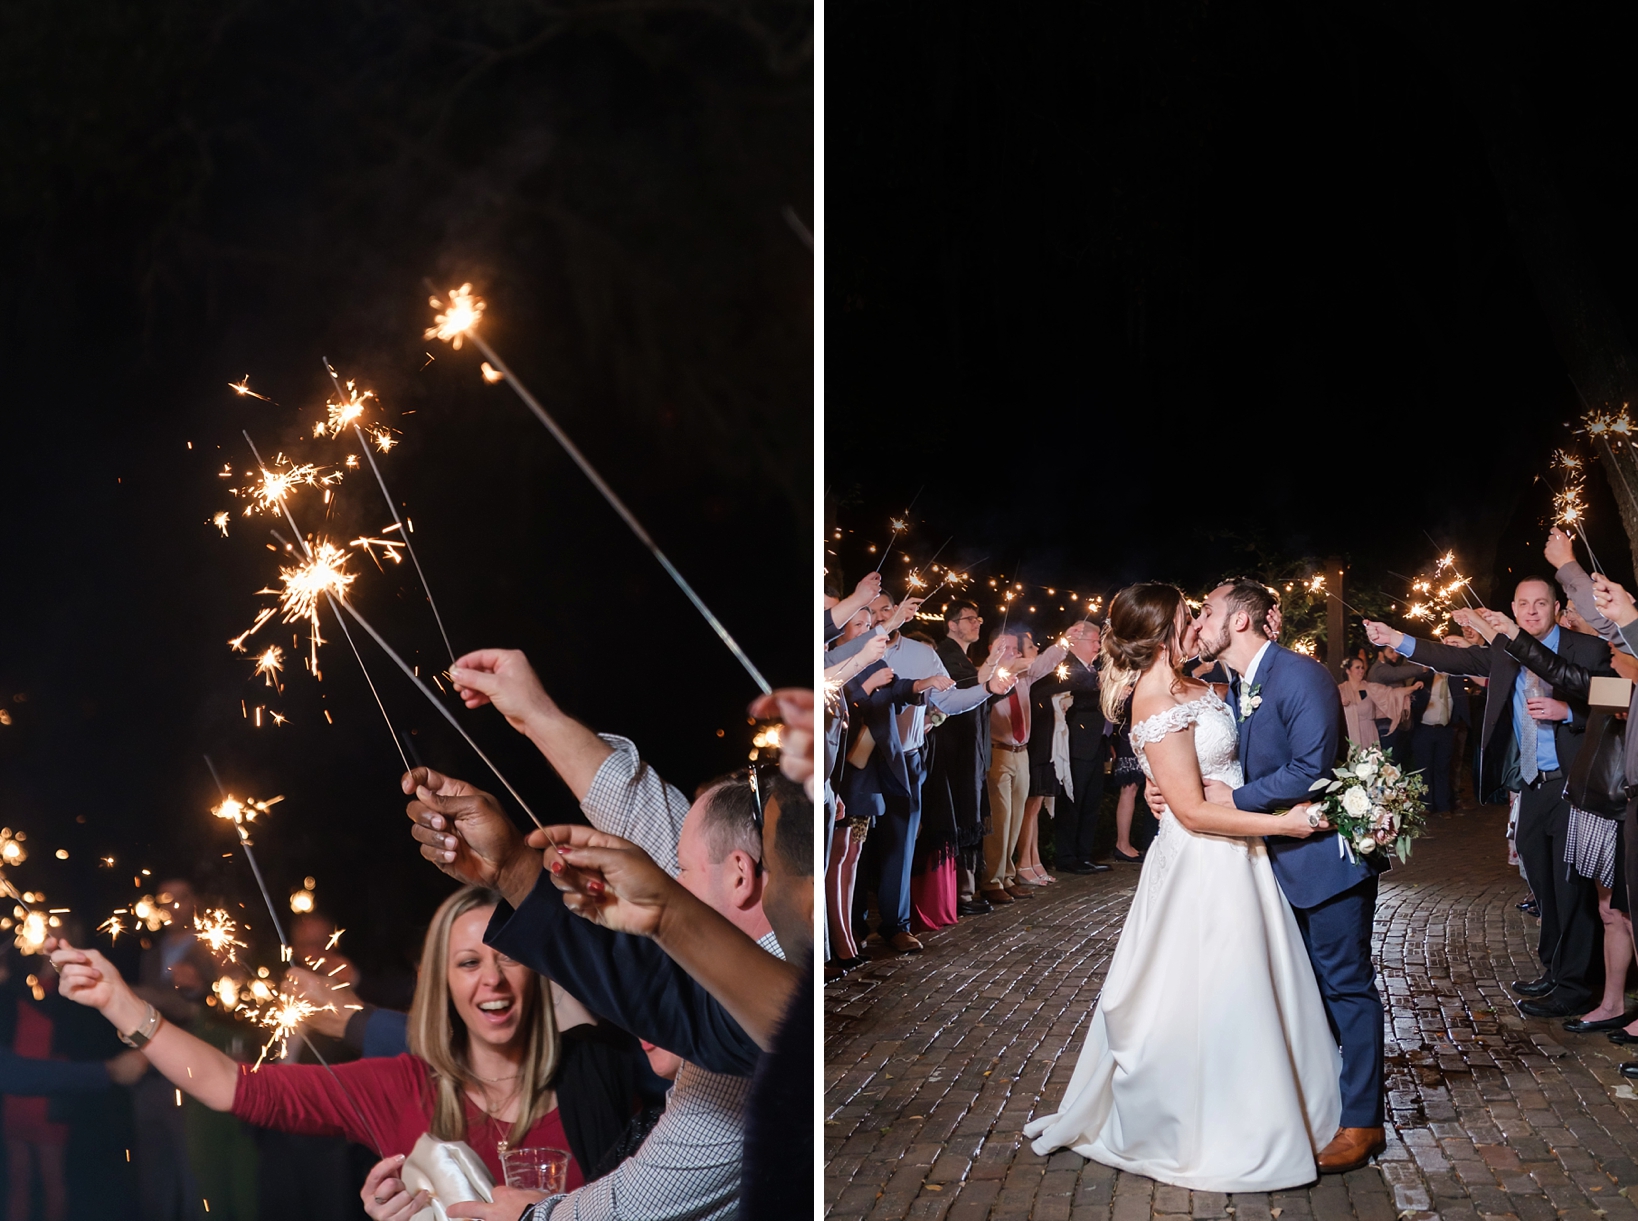 Sparklers held high and a kiss under the sparklers